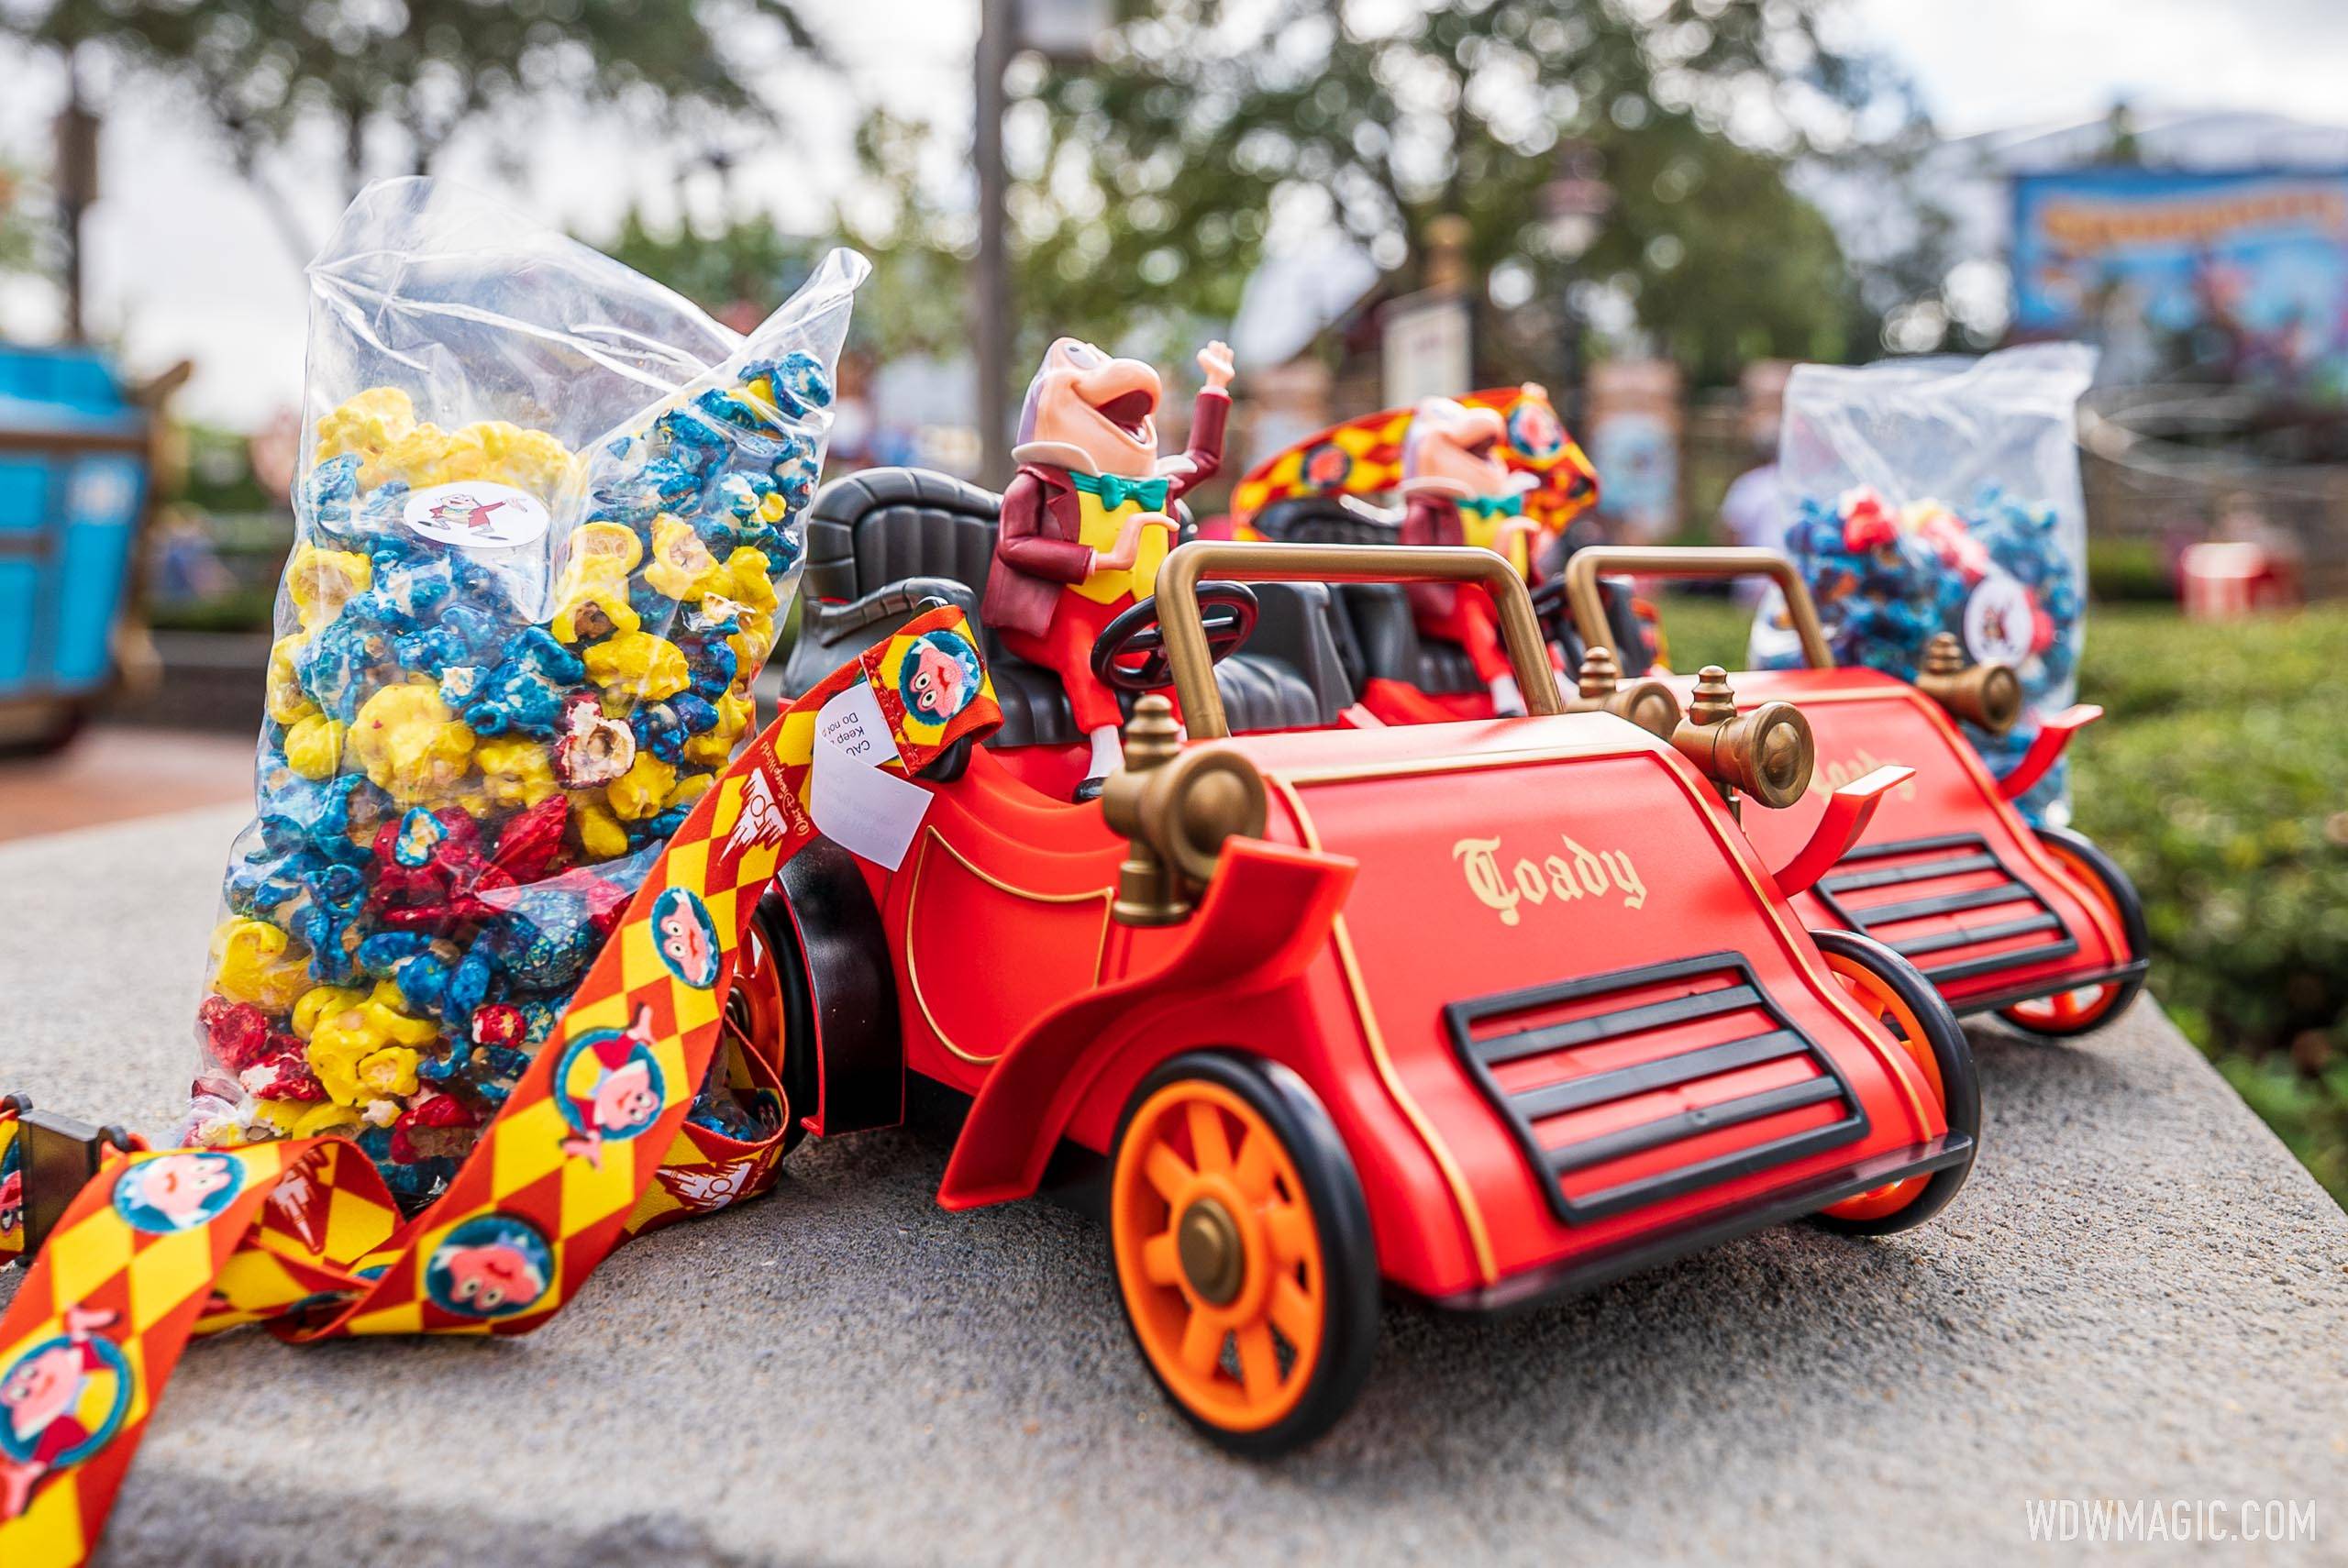 Mr. Toad's Wild Ride Popcorn Bucket now available at Disney Springs